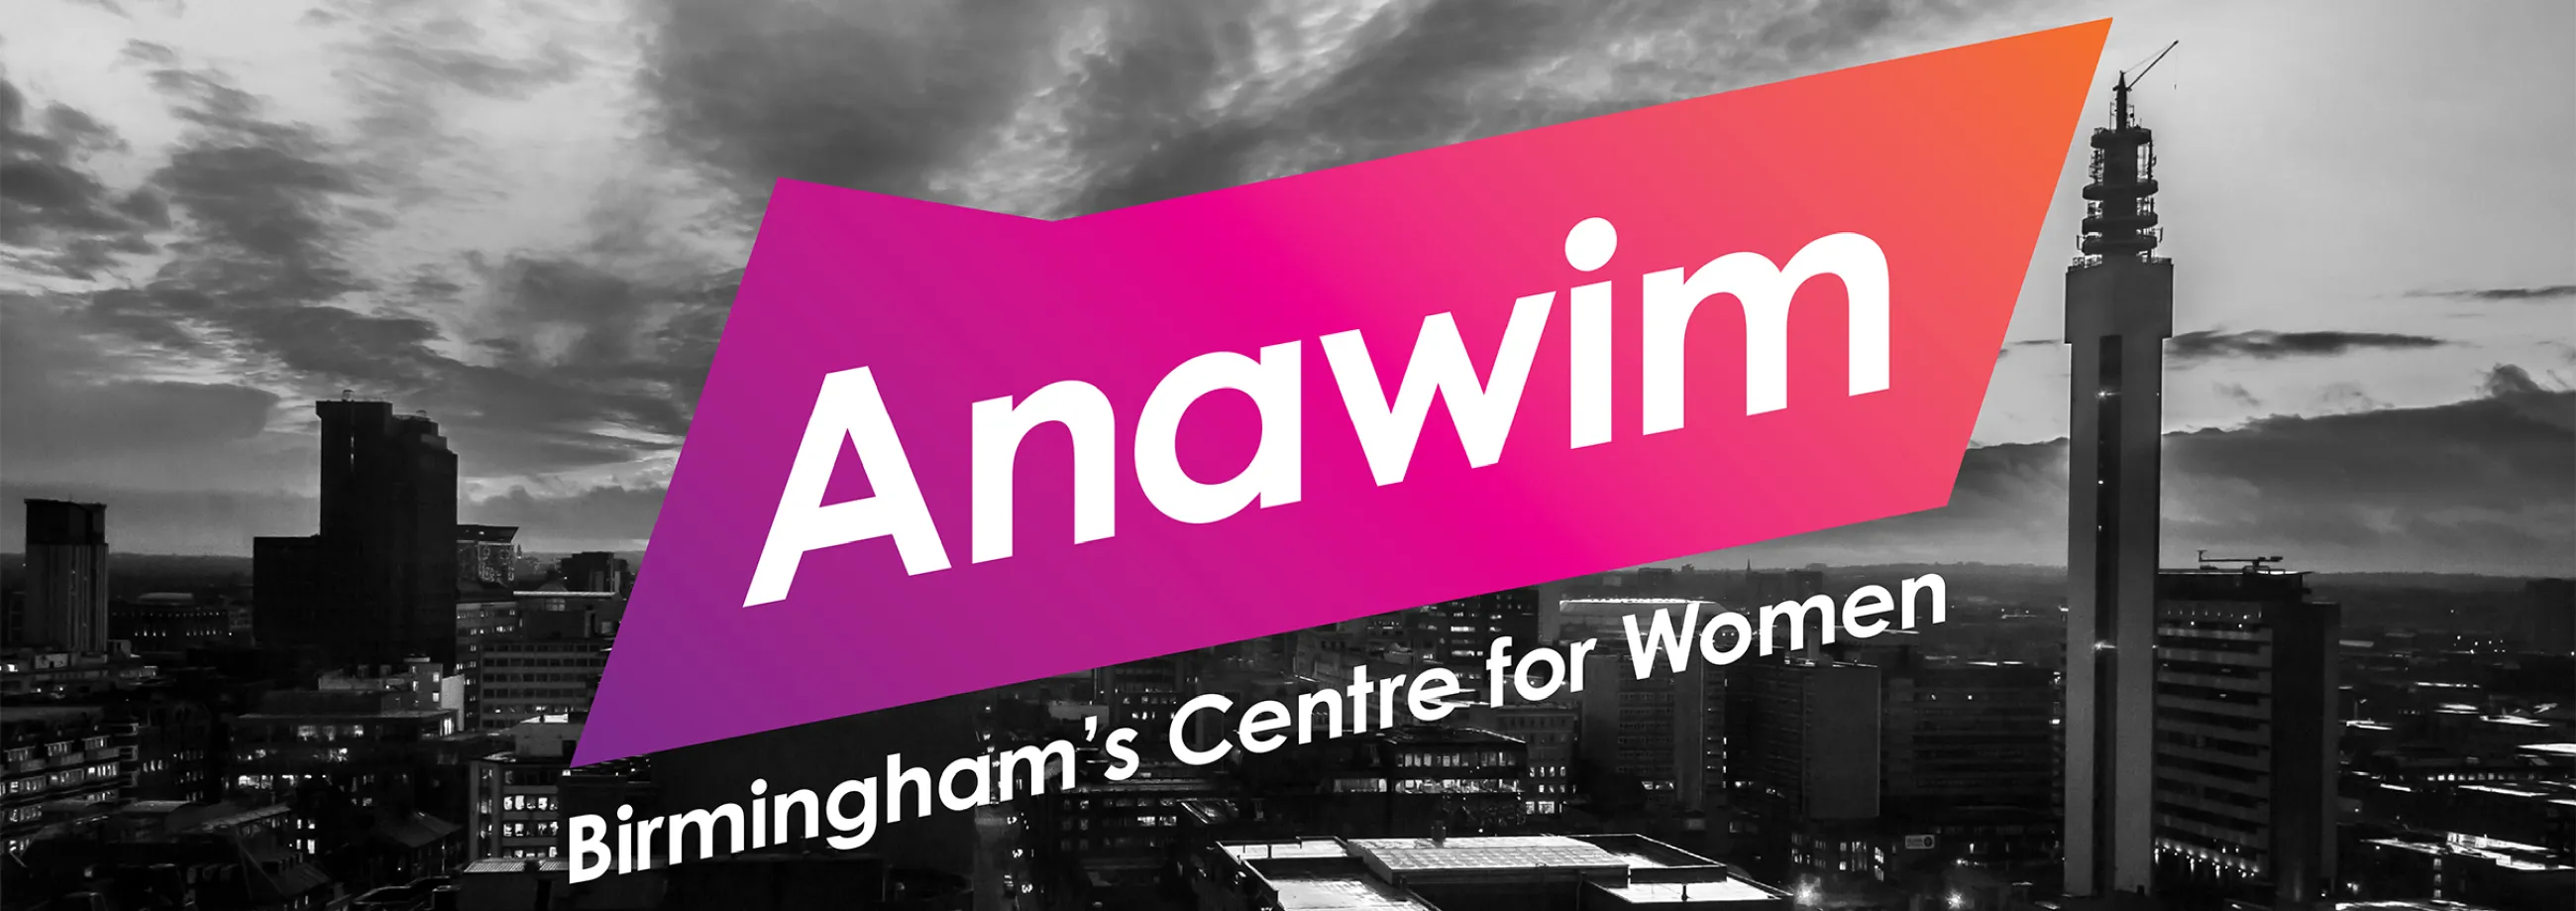 Anawim logo in shade of purple, pink and orange over black and white photo of Birmingham